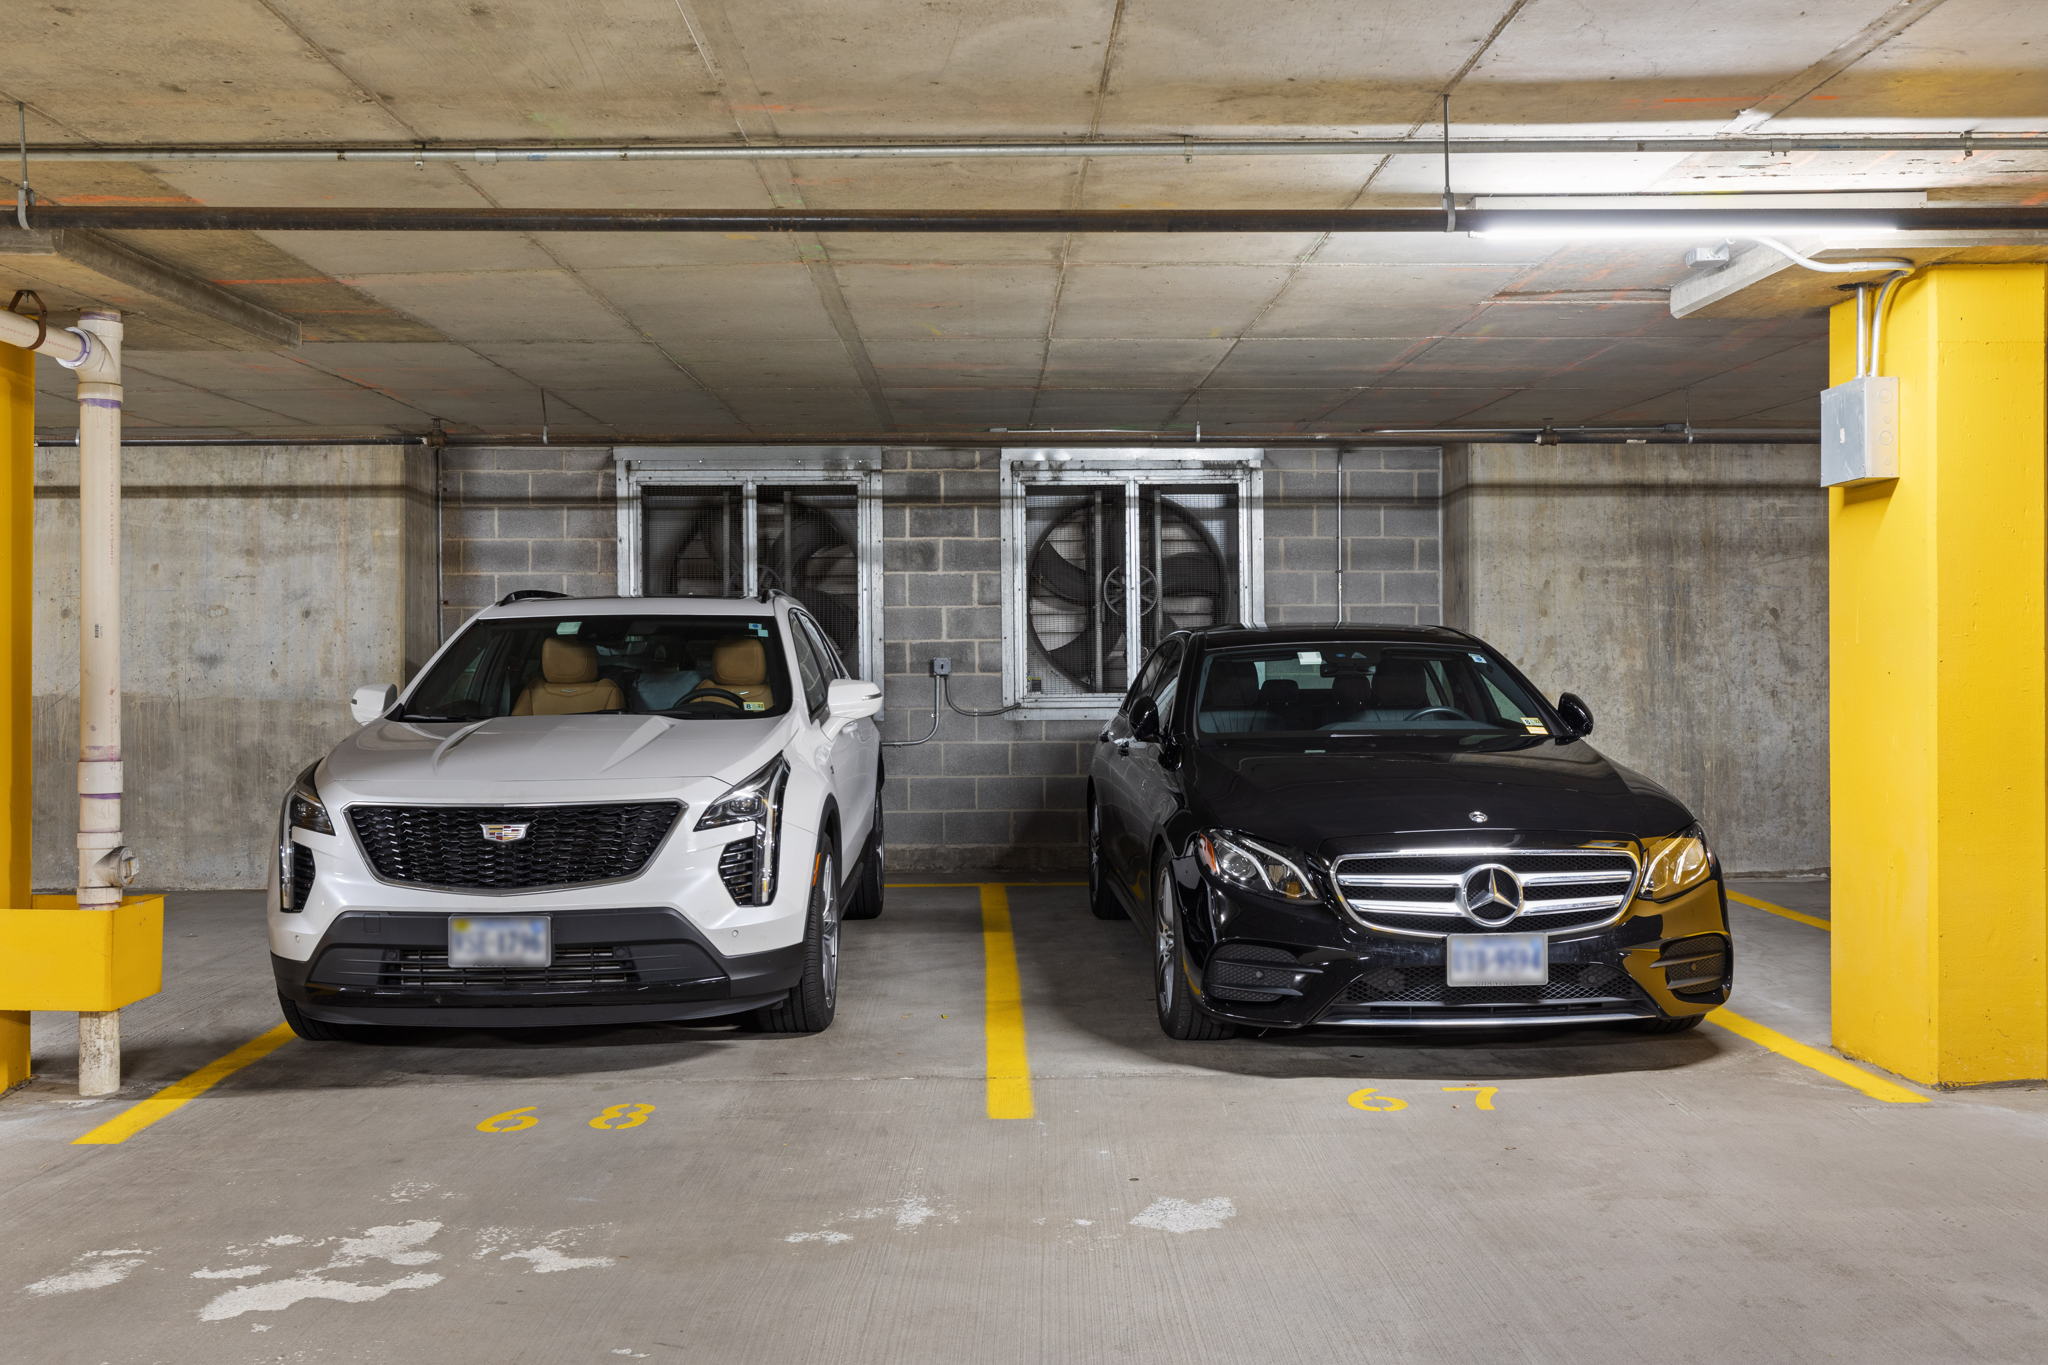 2 Reserved Garage Parking Spaces (GS 67; GS 68)